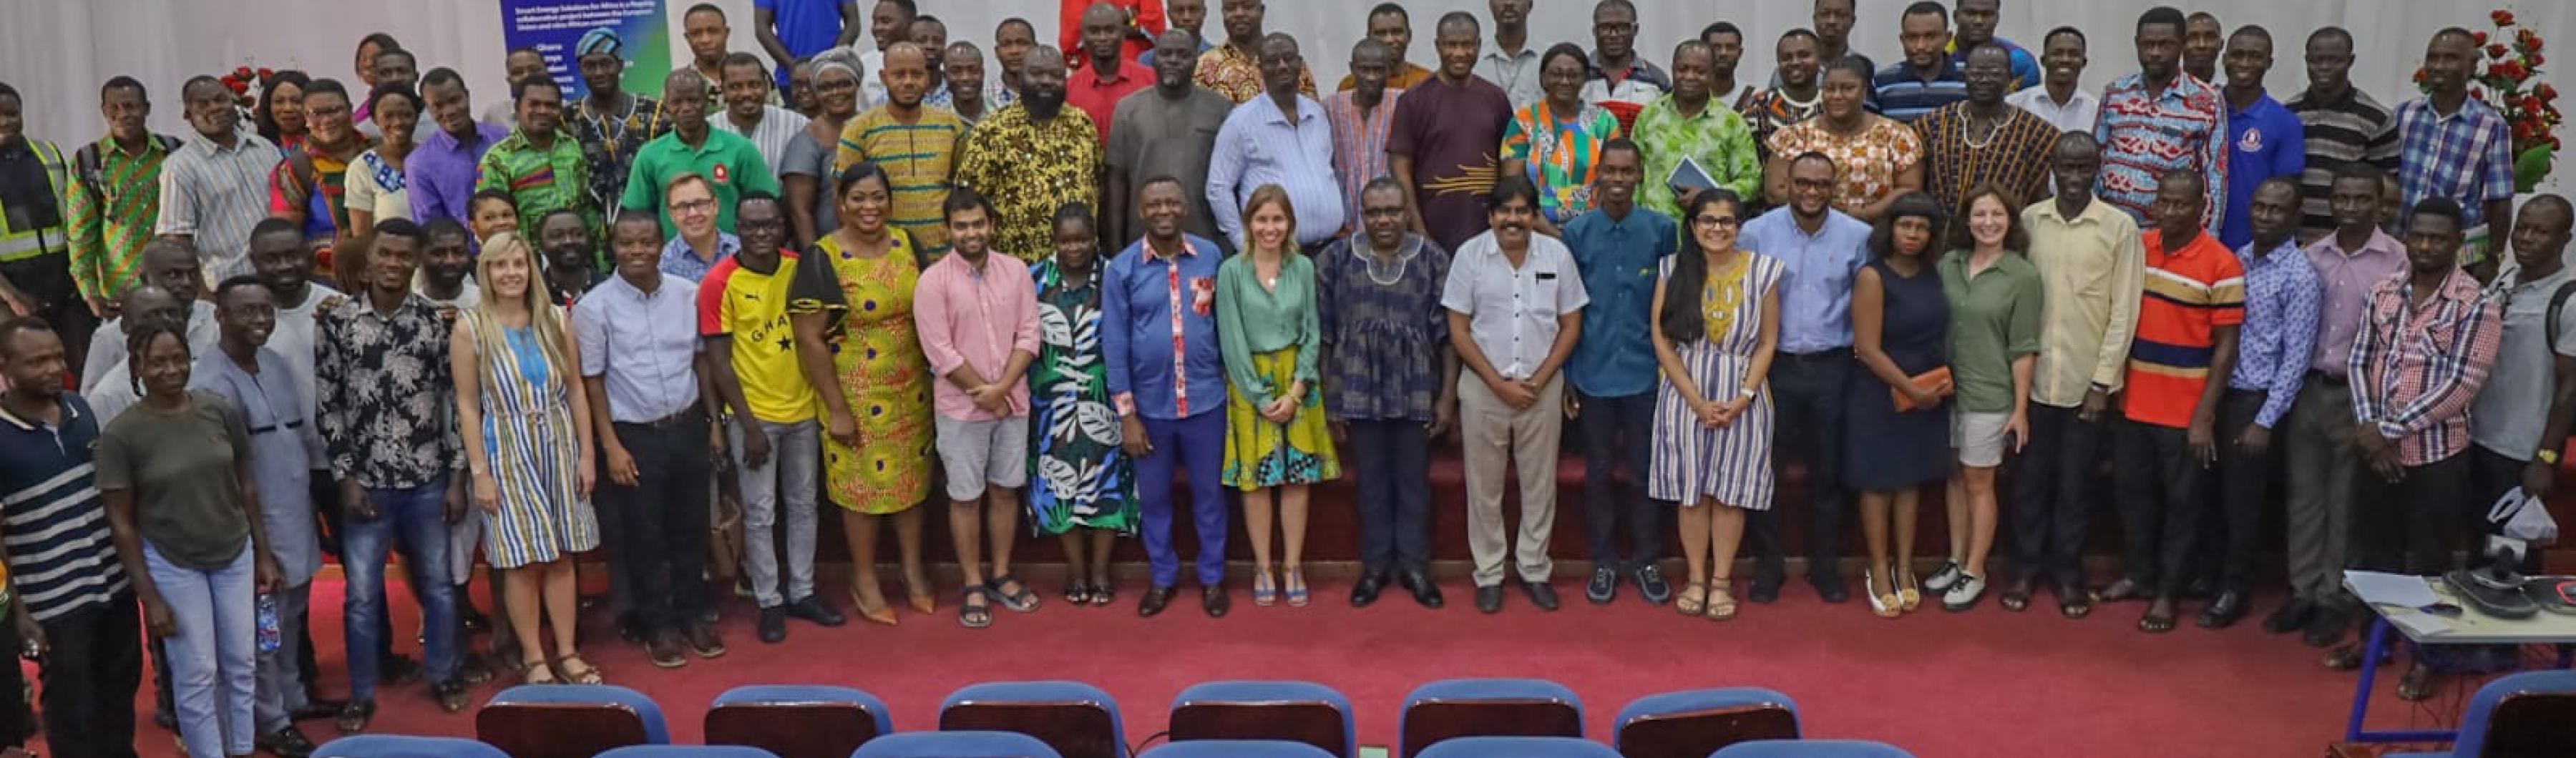 a group photo of participants in the peer-to-peer exchange in Ghana